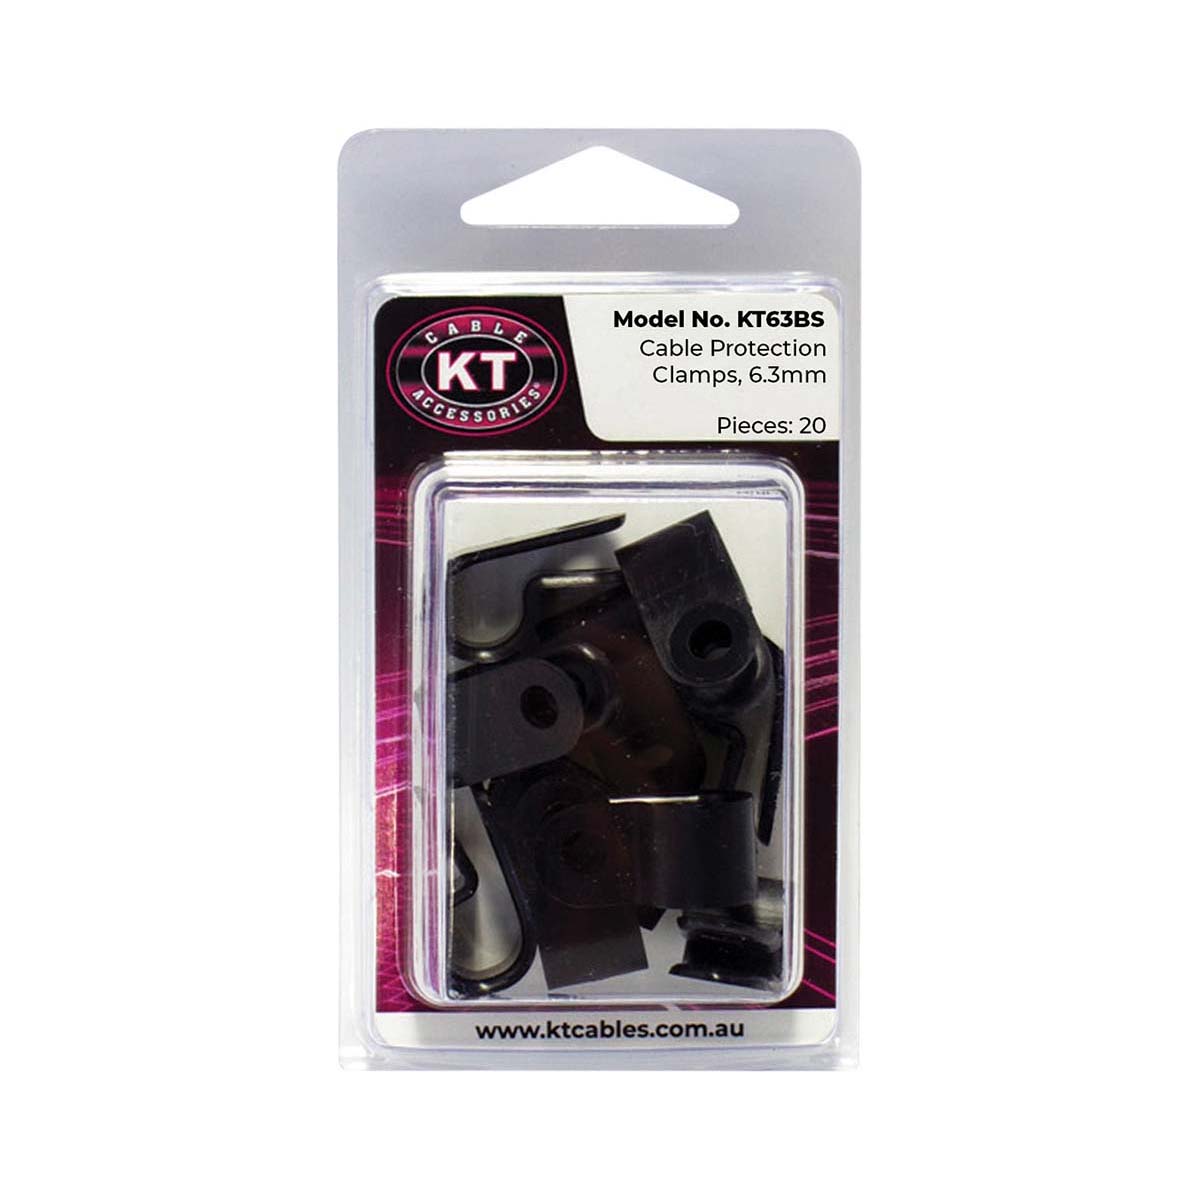 KT Cables Cable Protection Clamps 20 Pack 6.3mm